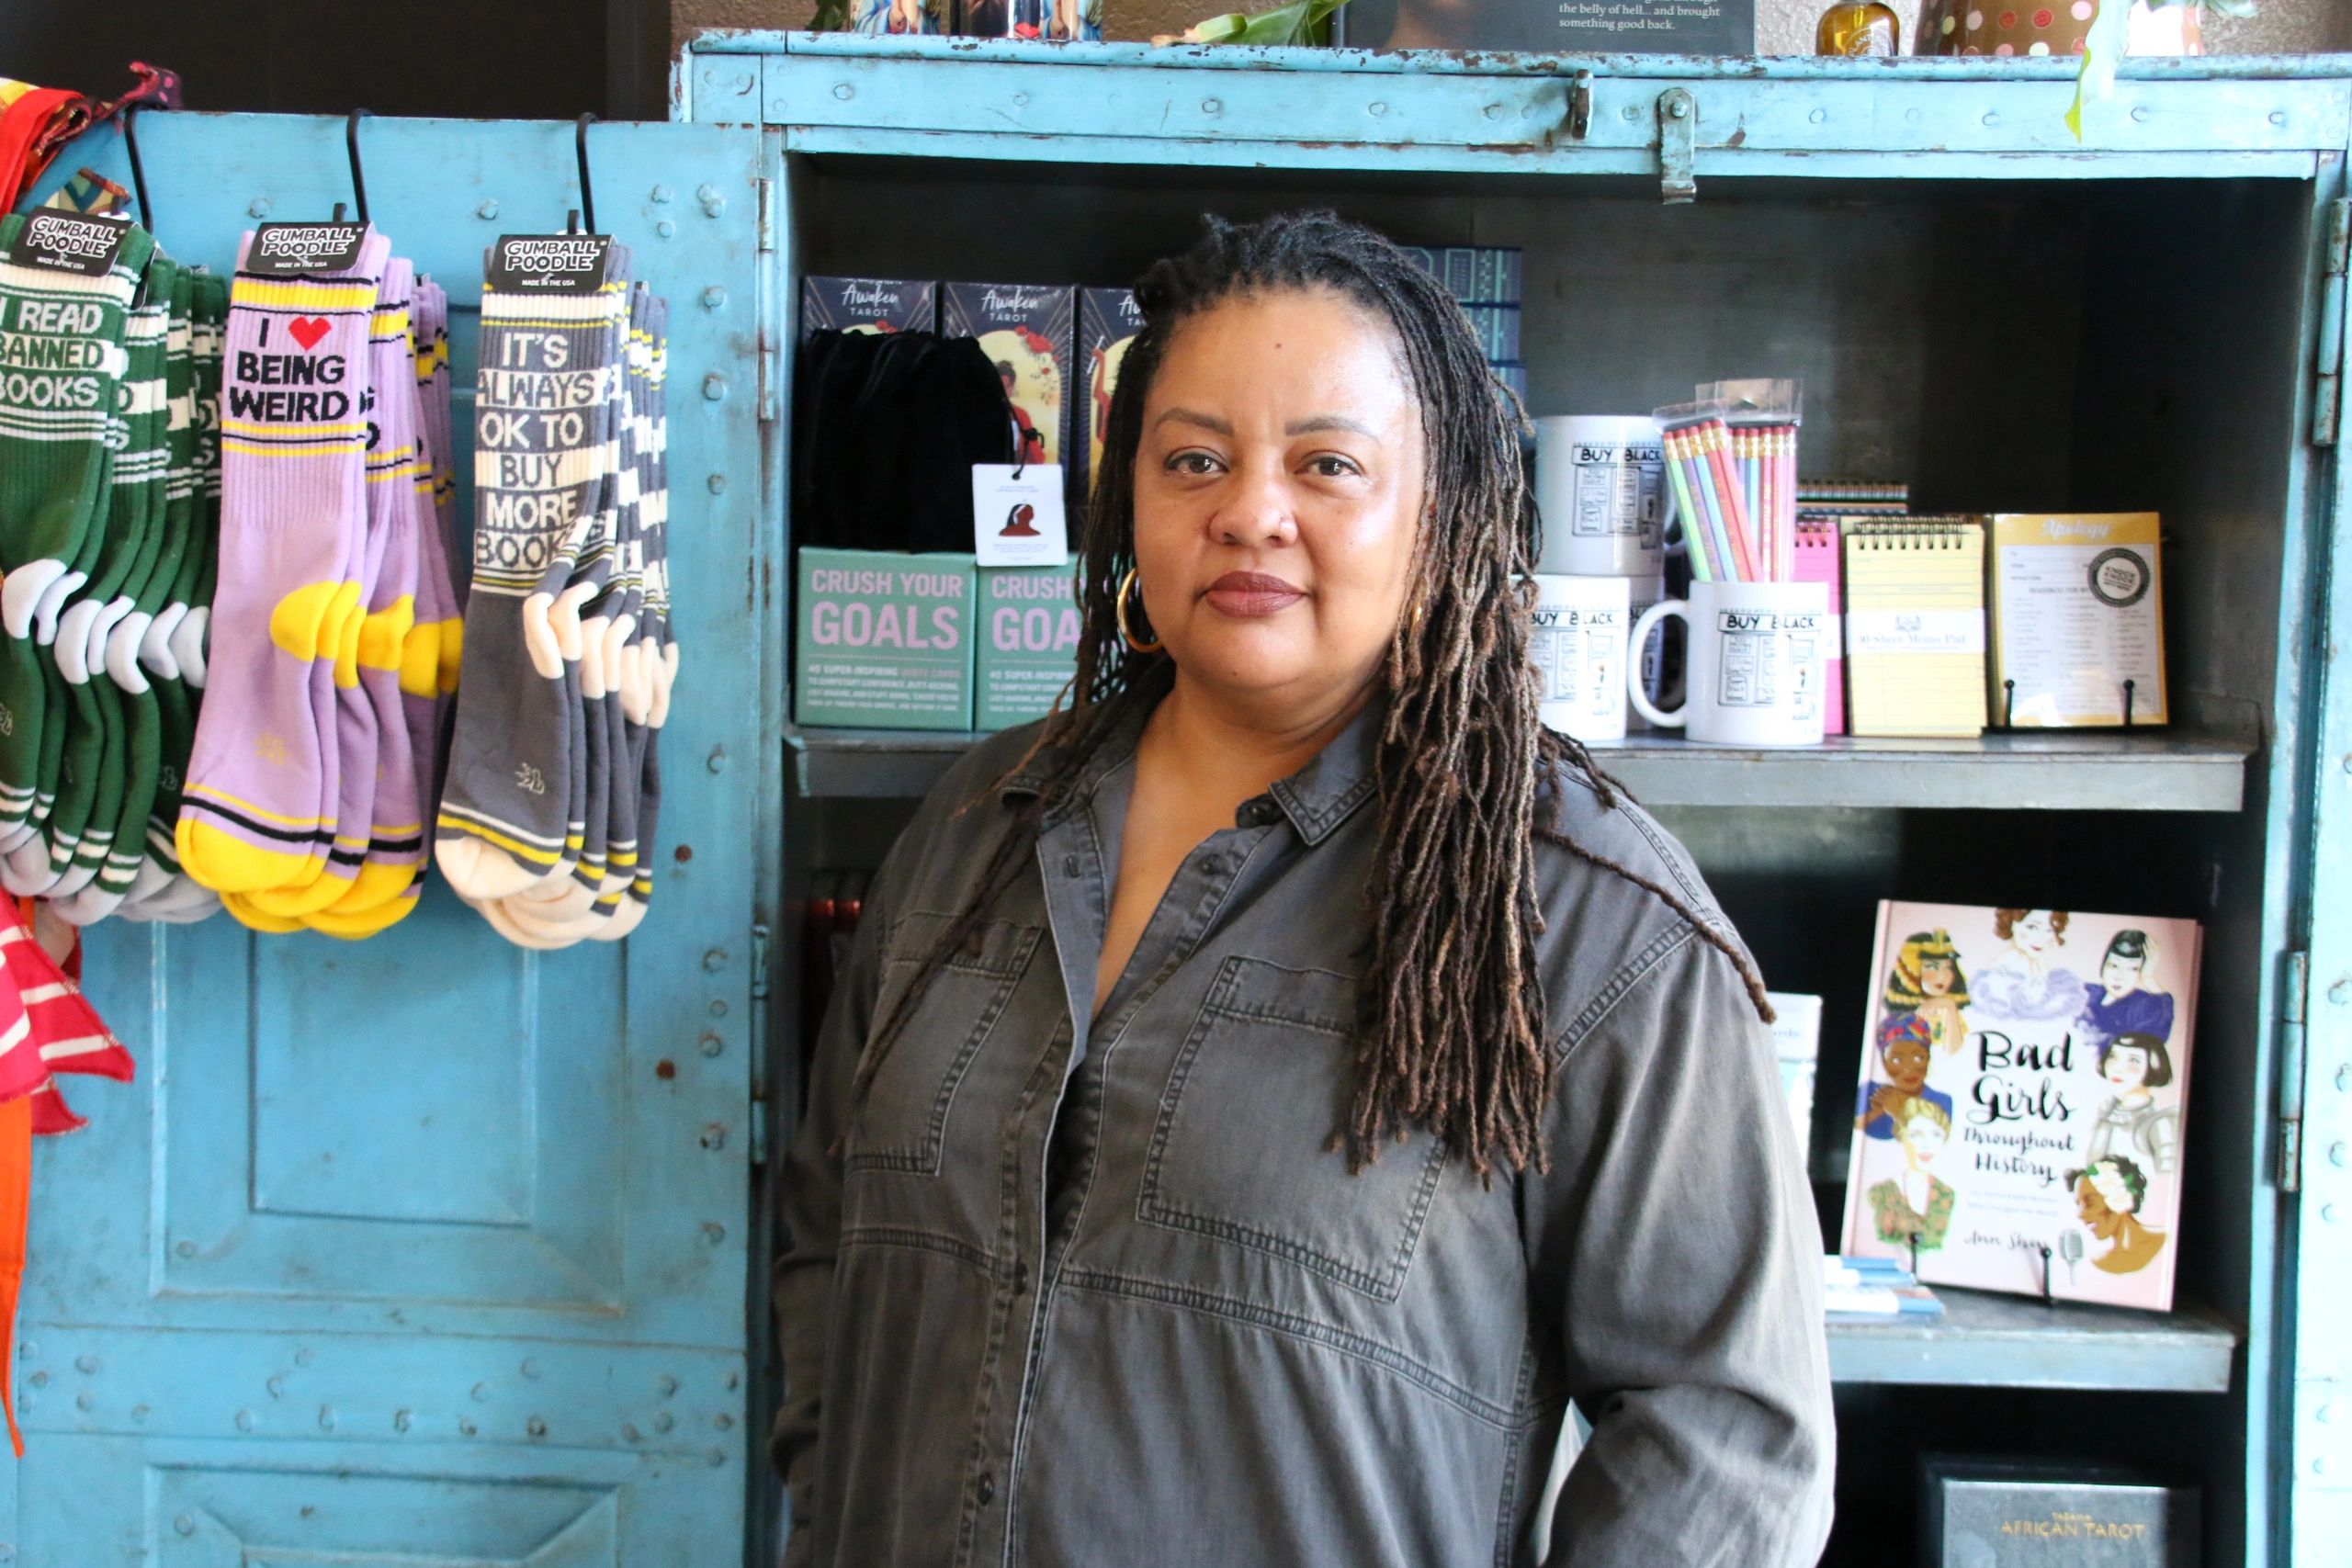 The Book Pages: Octavia's Bookshelf owner Nikki High on an incredible first  week – Orange County Register